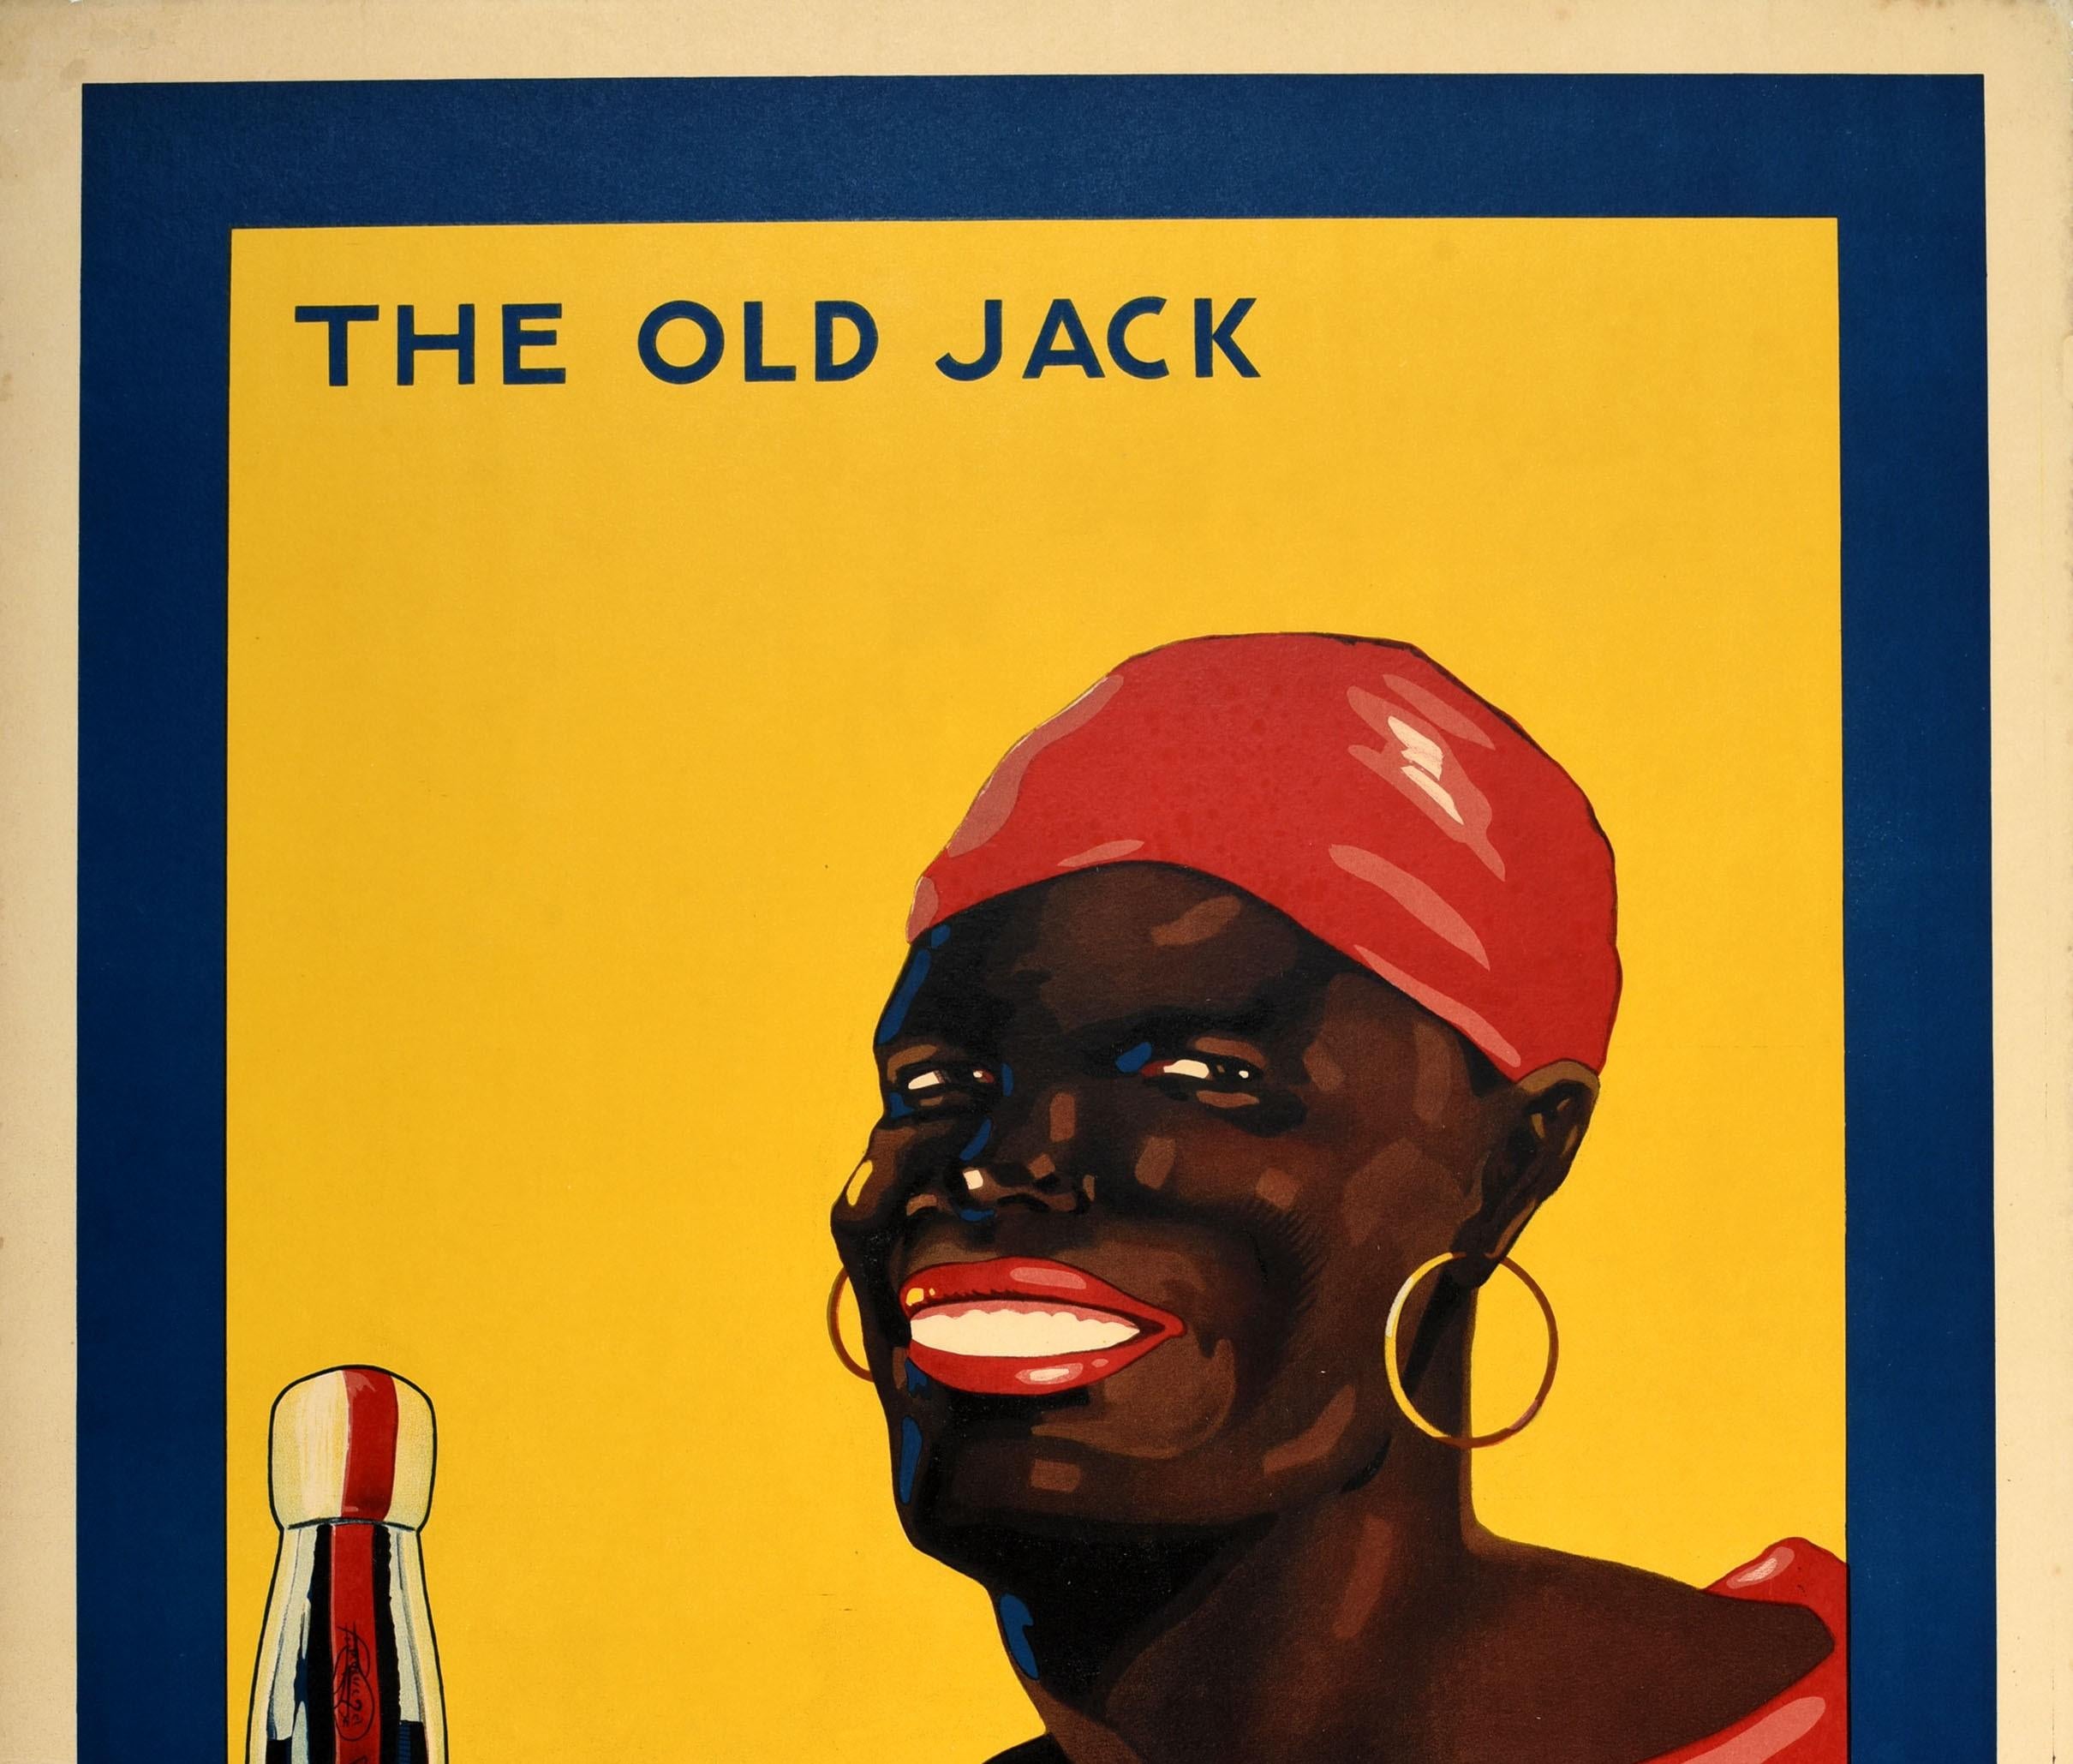 Original antique drink poster for Old Rum Rhumprat The Old Jack Estillo Jamaica Fabricado por J. Prat de la Riba Rodona West Indies Rum. Colourful image on a yellow and blue background featuring a smiling person wearing a red bandana headband and